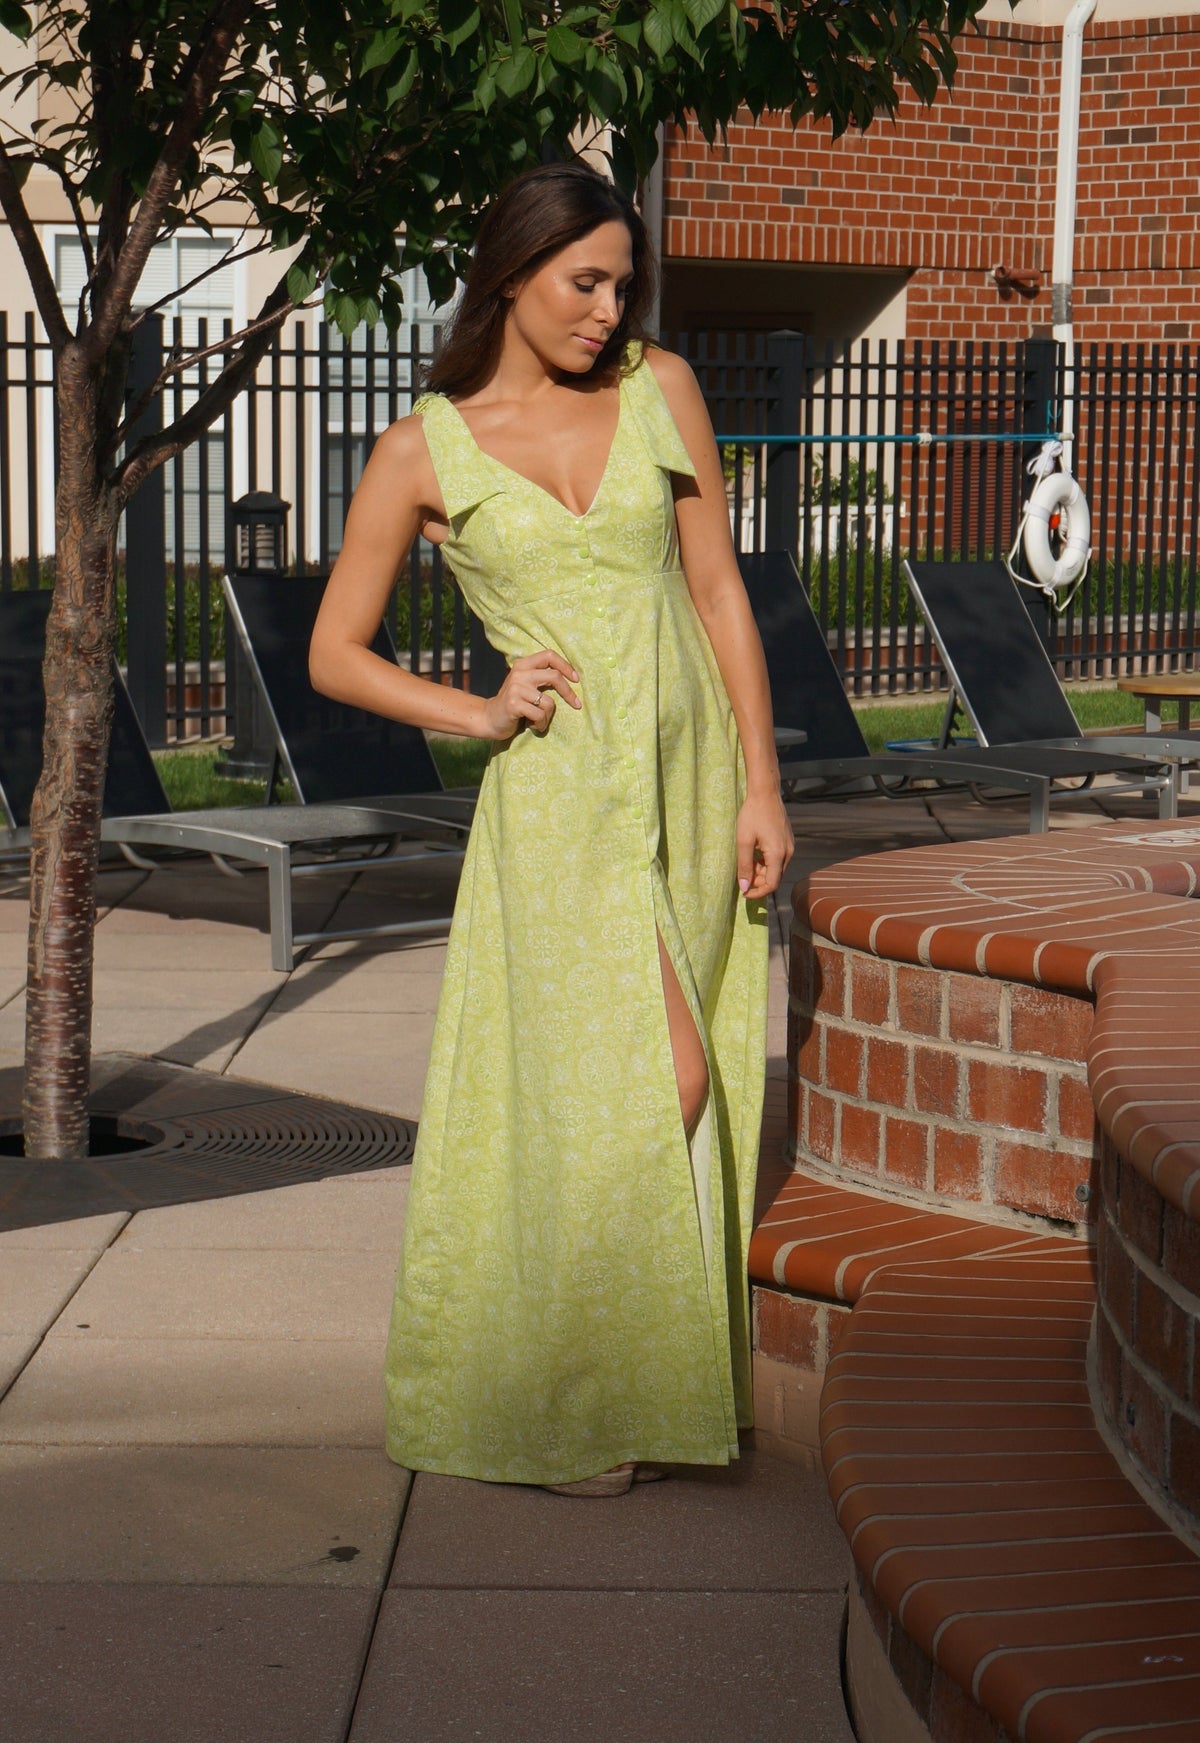 Model wearing a light green maxi dress by the pool.